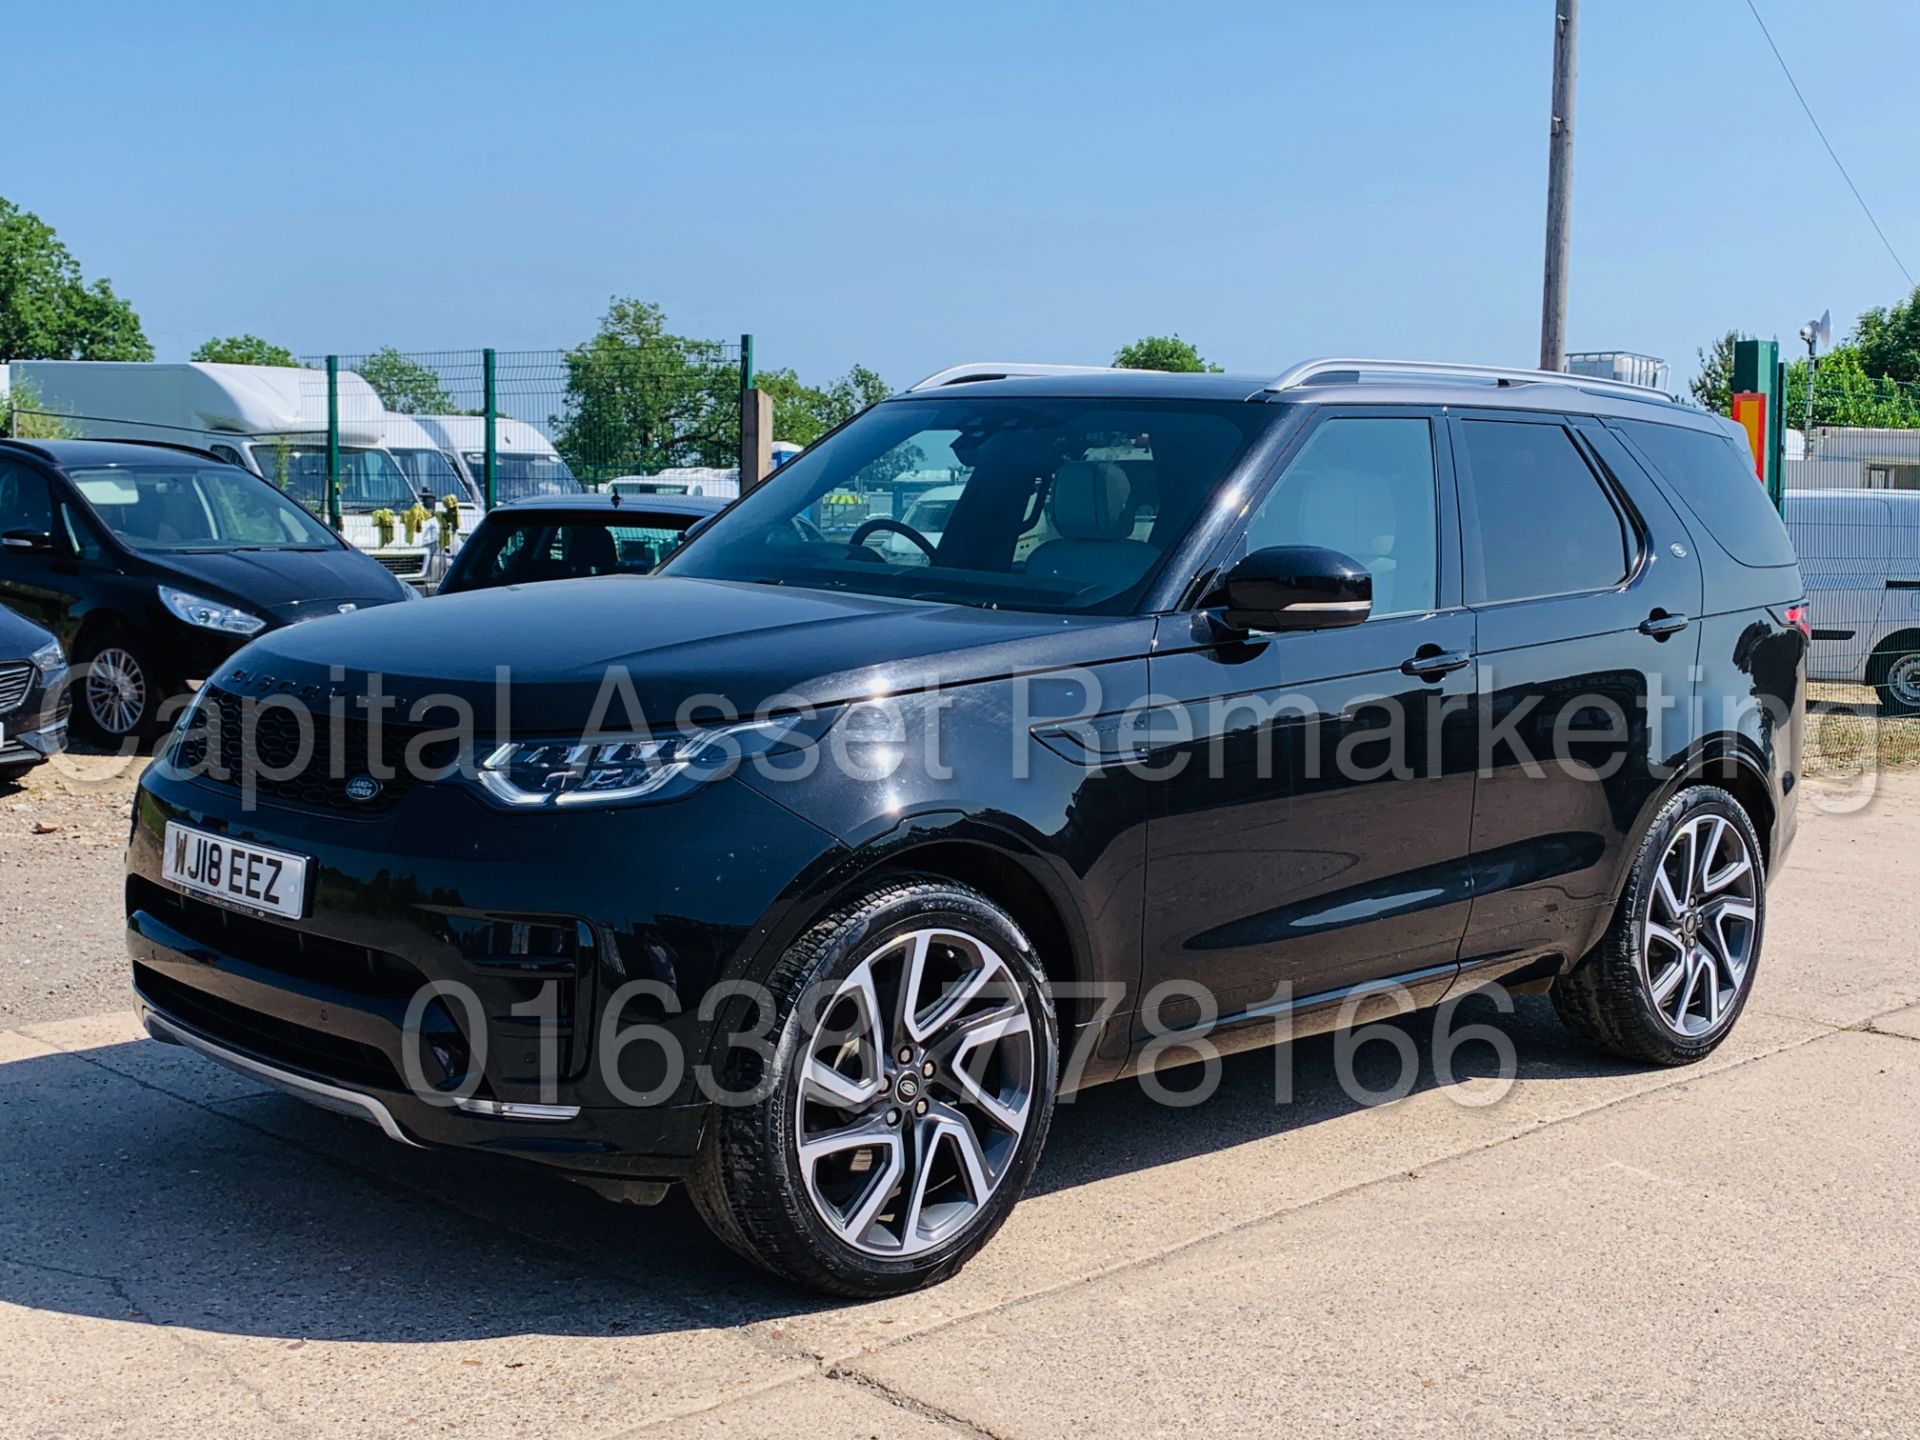 LAND ROVER DISCOVERY *HSE Dynamic* 7 SEATER SUV (2018 - NEW MODEL) '3.0 TD6 - 258 BHP -8 SPEED AUTO' - Image 6 of 68